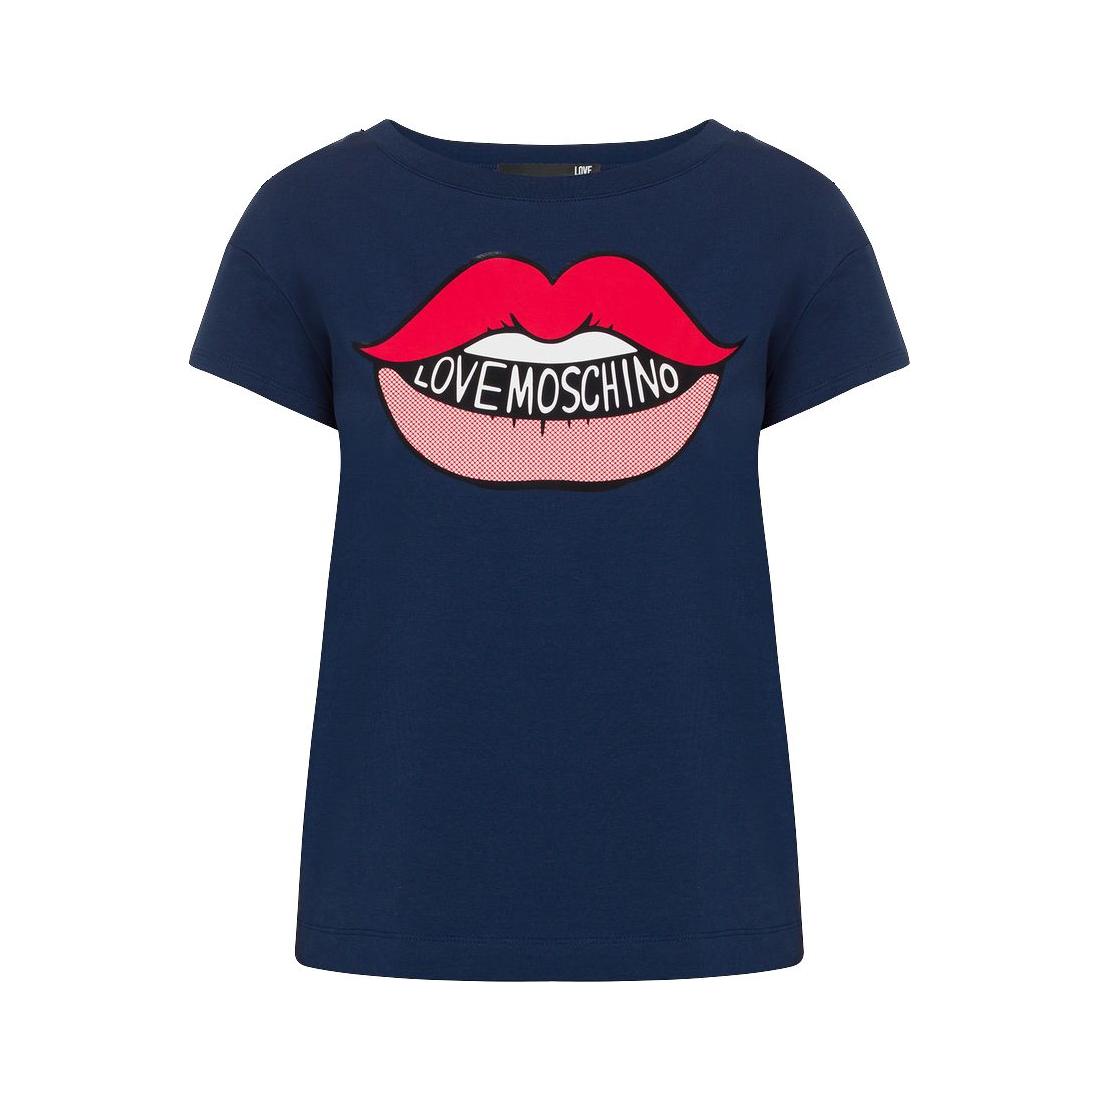 Love Moschino Graphic Lips Jersey Tee in Navy Blue blue-cotton-tops-t-shirt-6